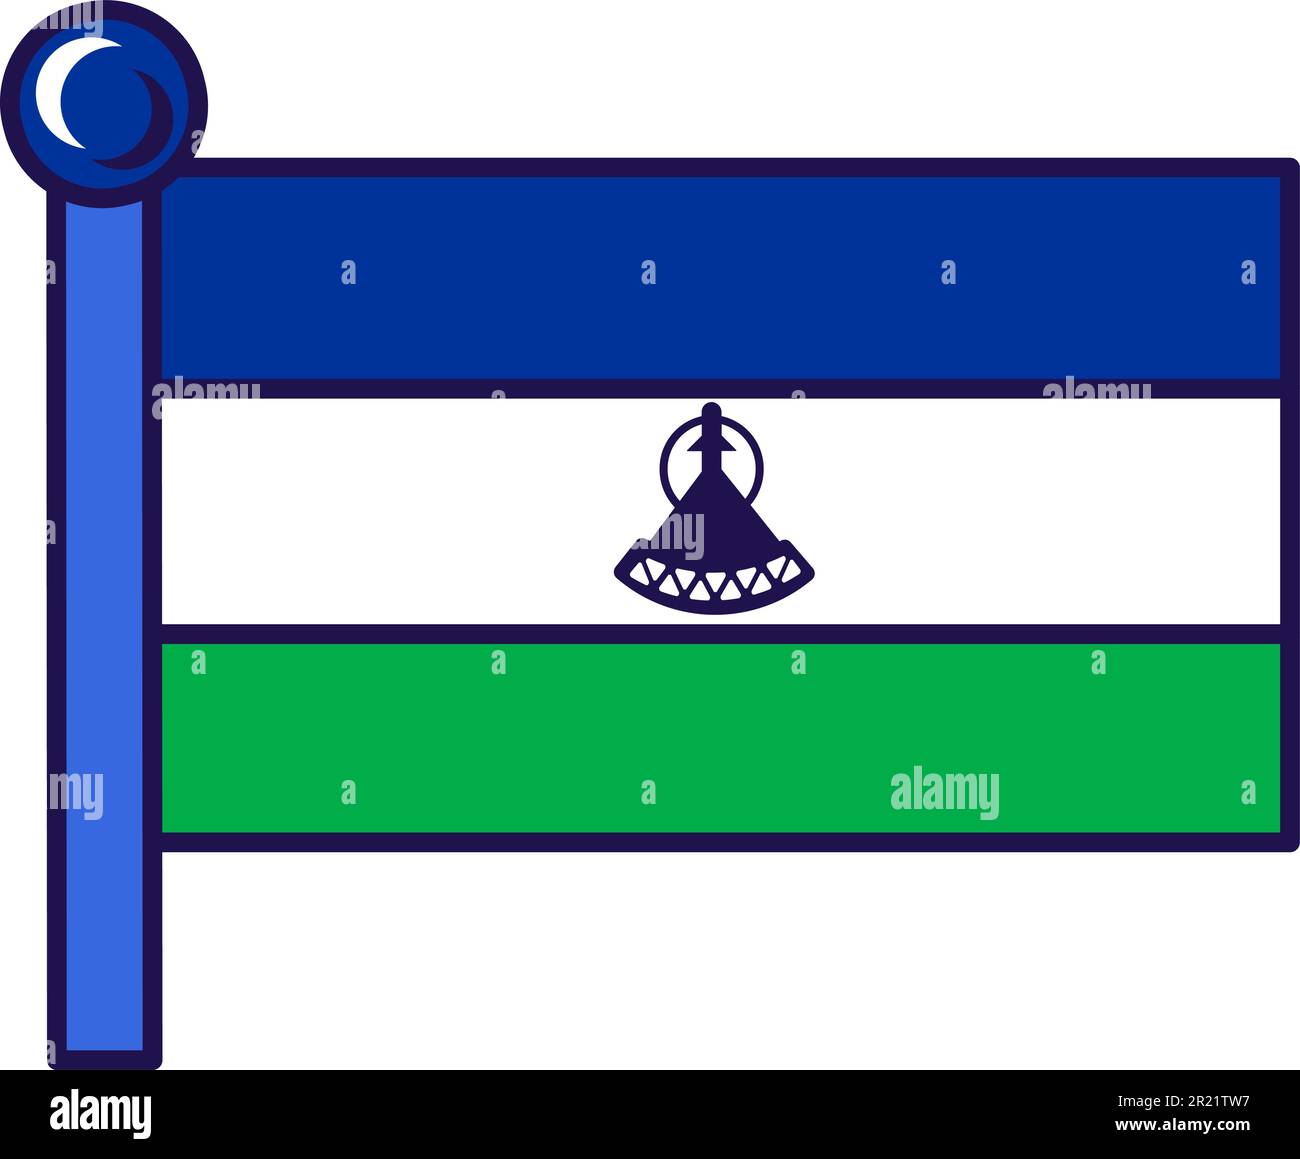 Lesotho national flag stock vector images